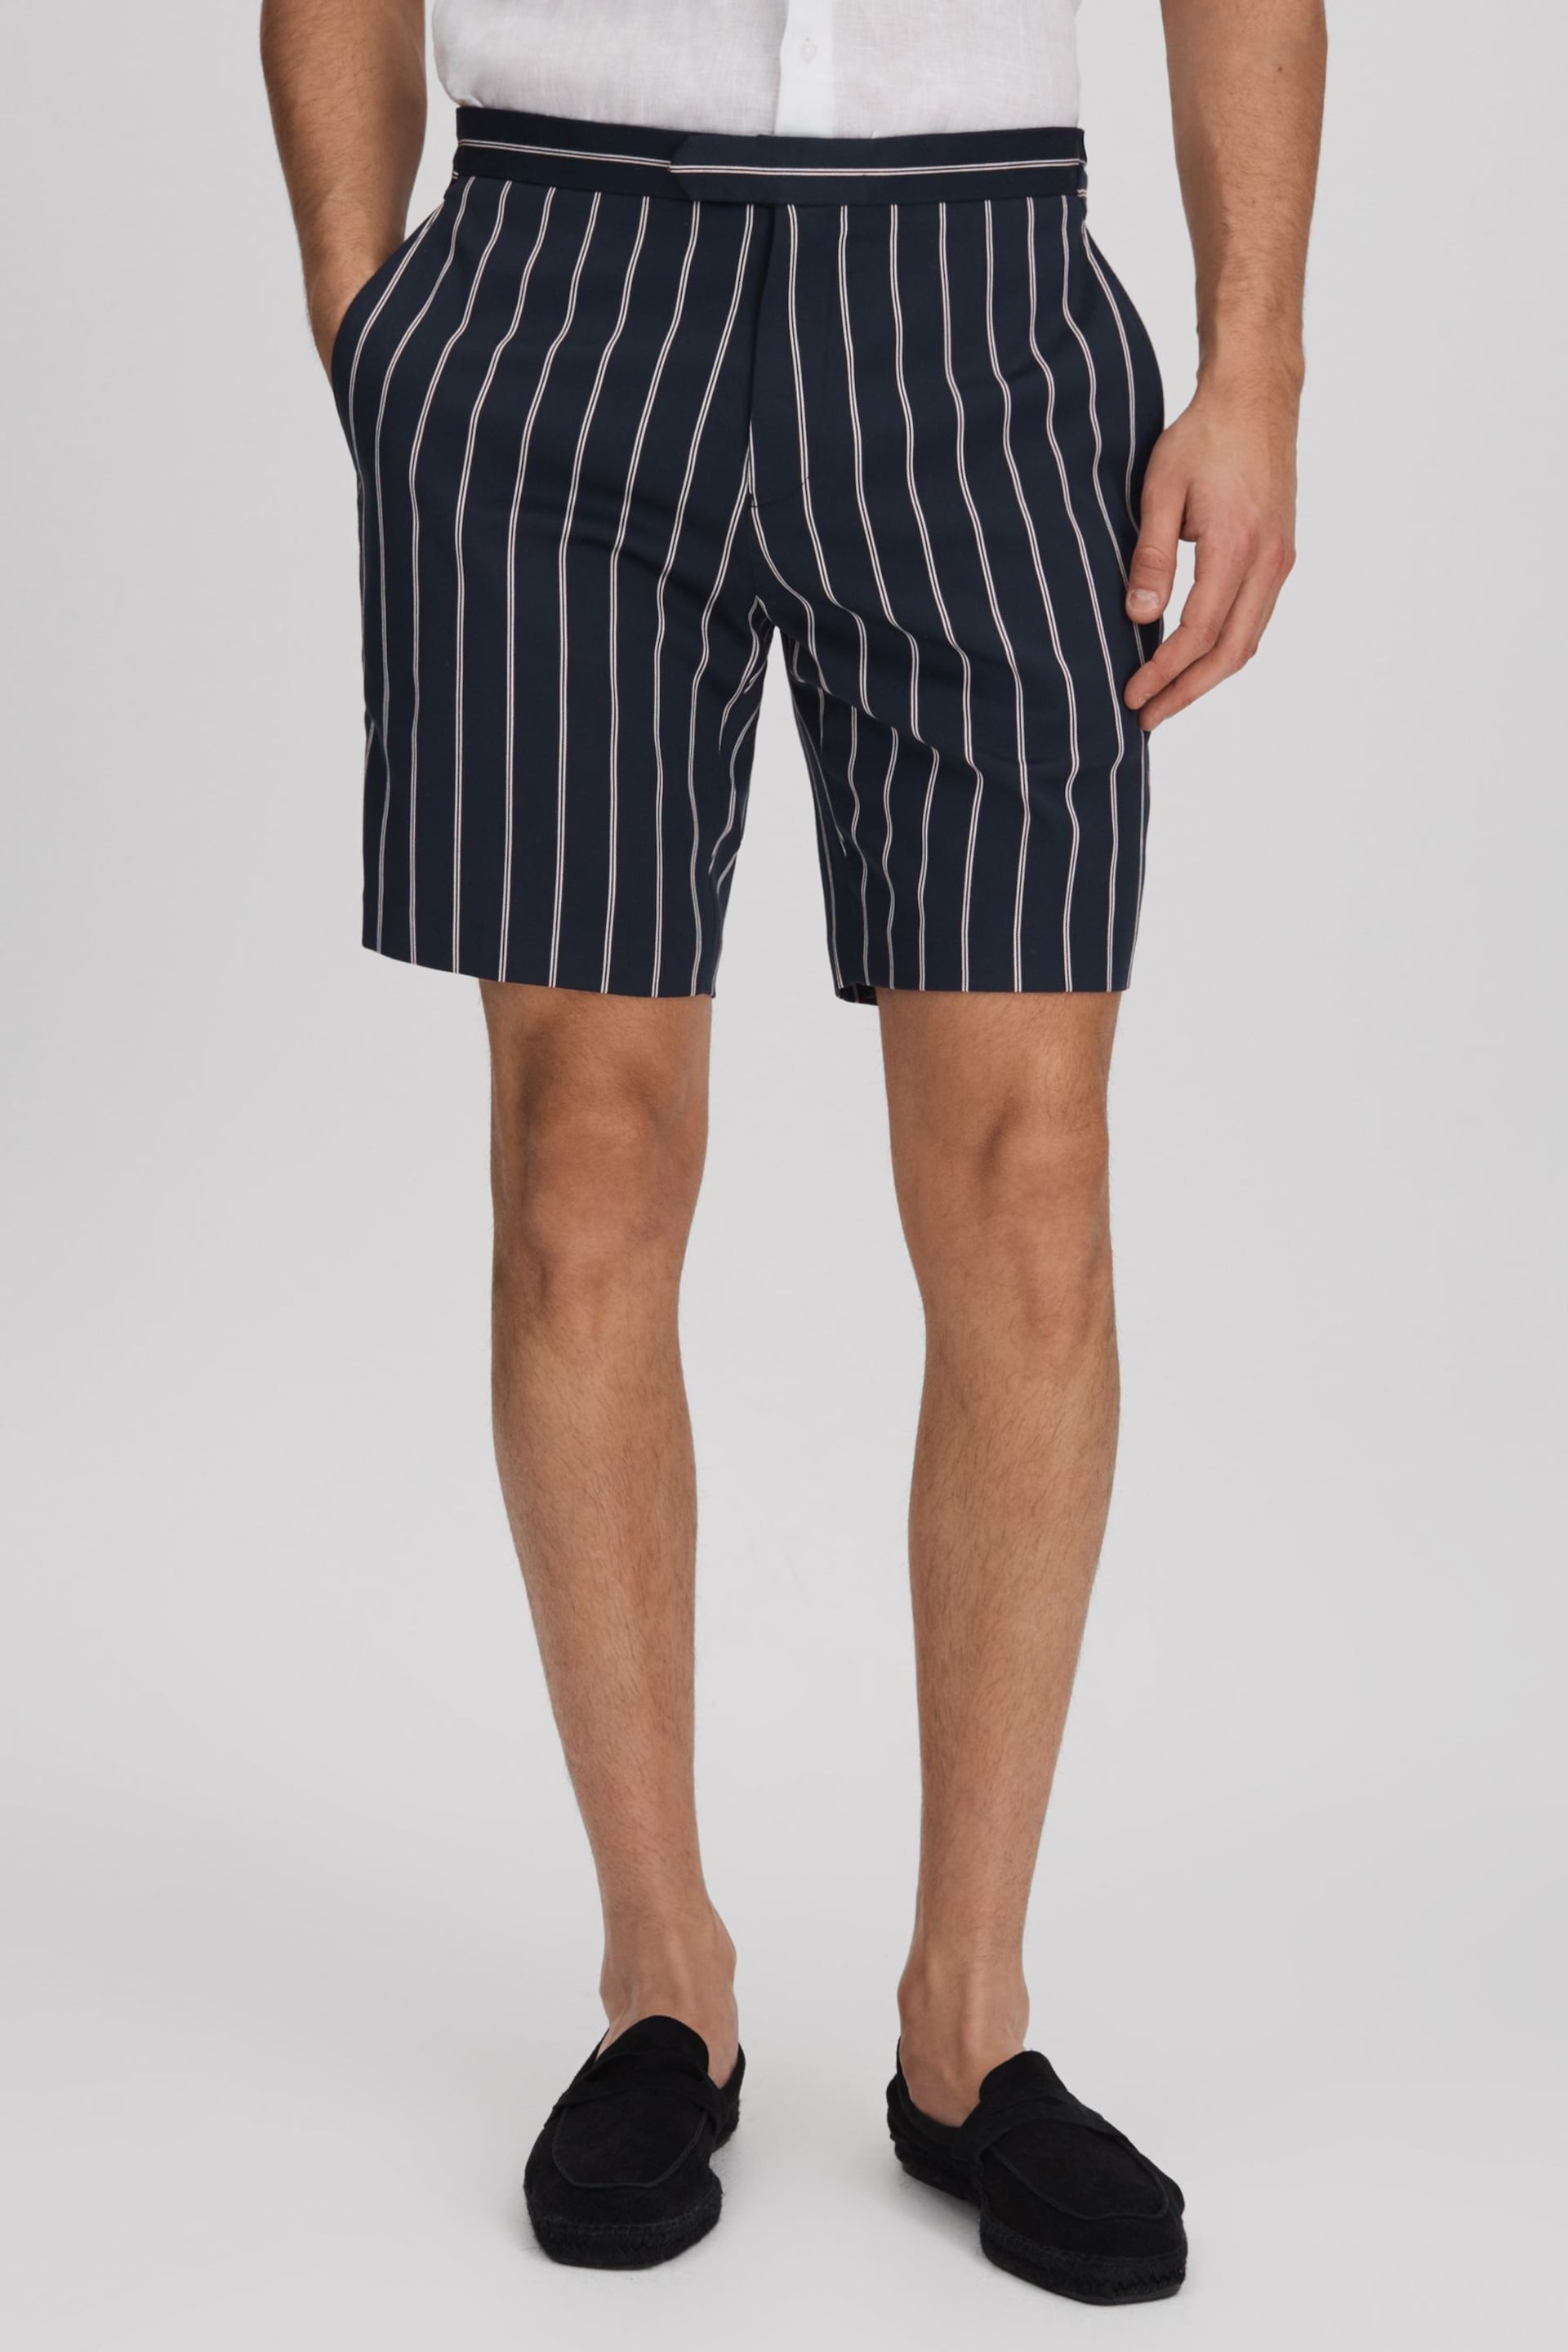 Reiss Navy/White Lake Striped Side Adjuster Shorts - Image 3 of 6